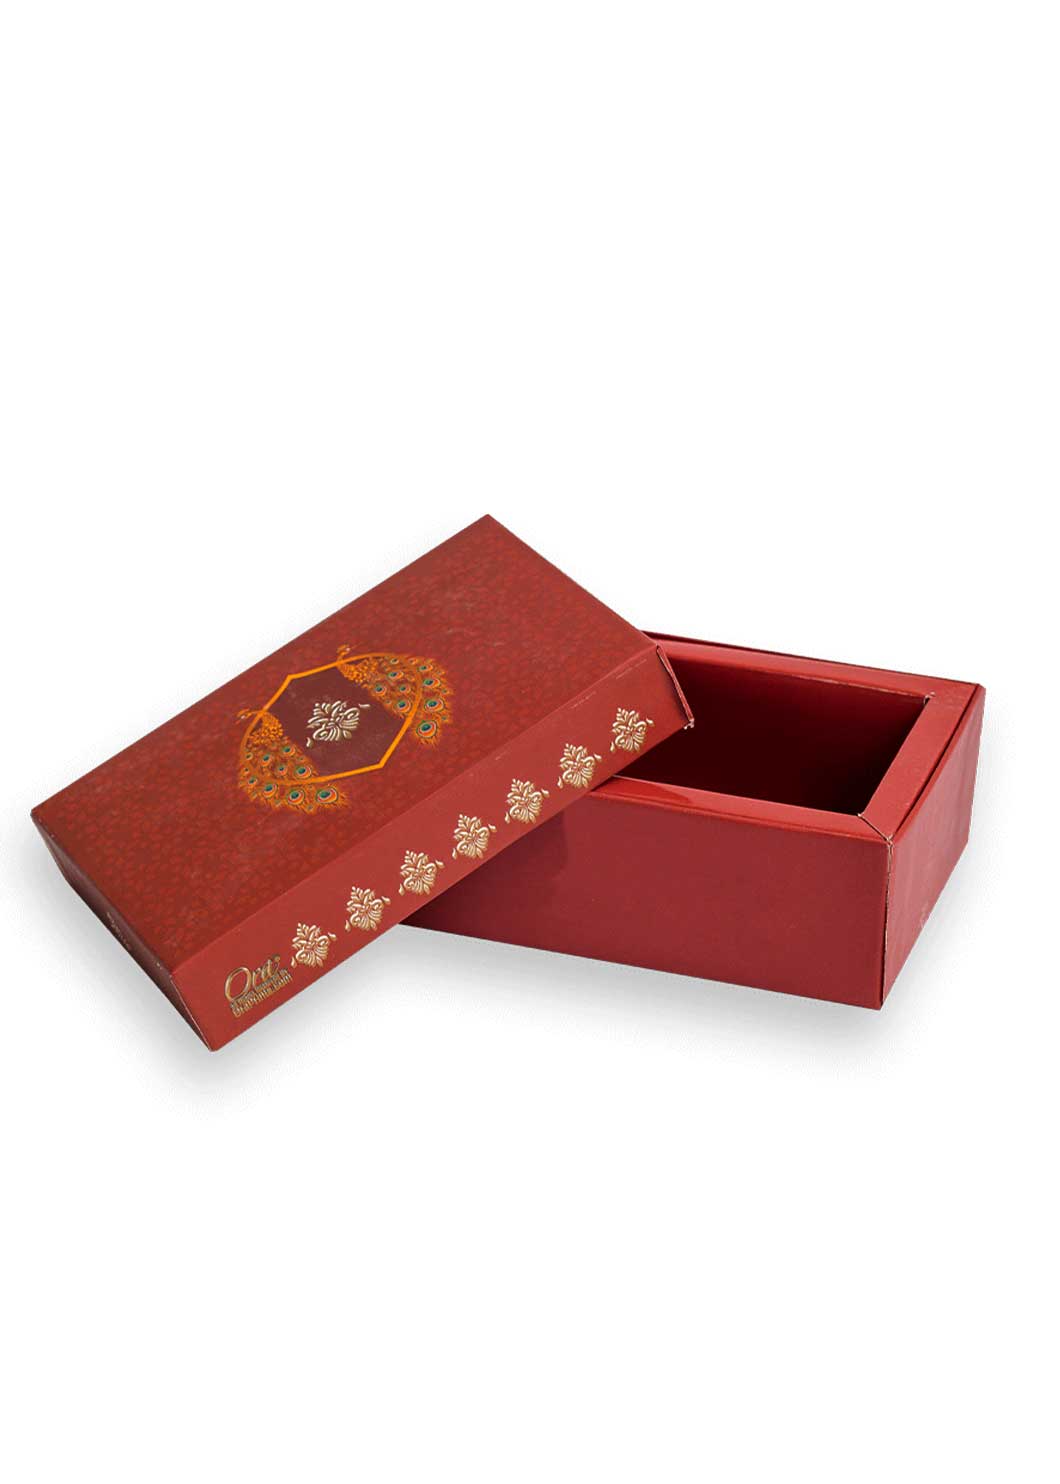 Beautiful Peacock Red & Gold Design Box for Packing